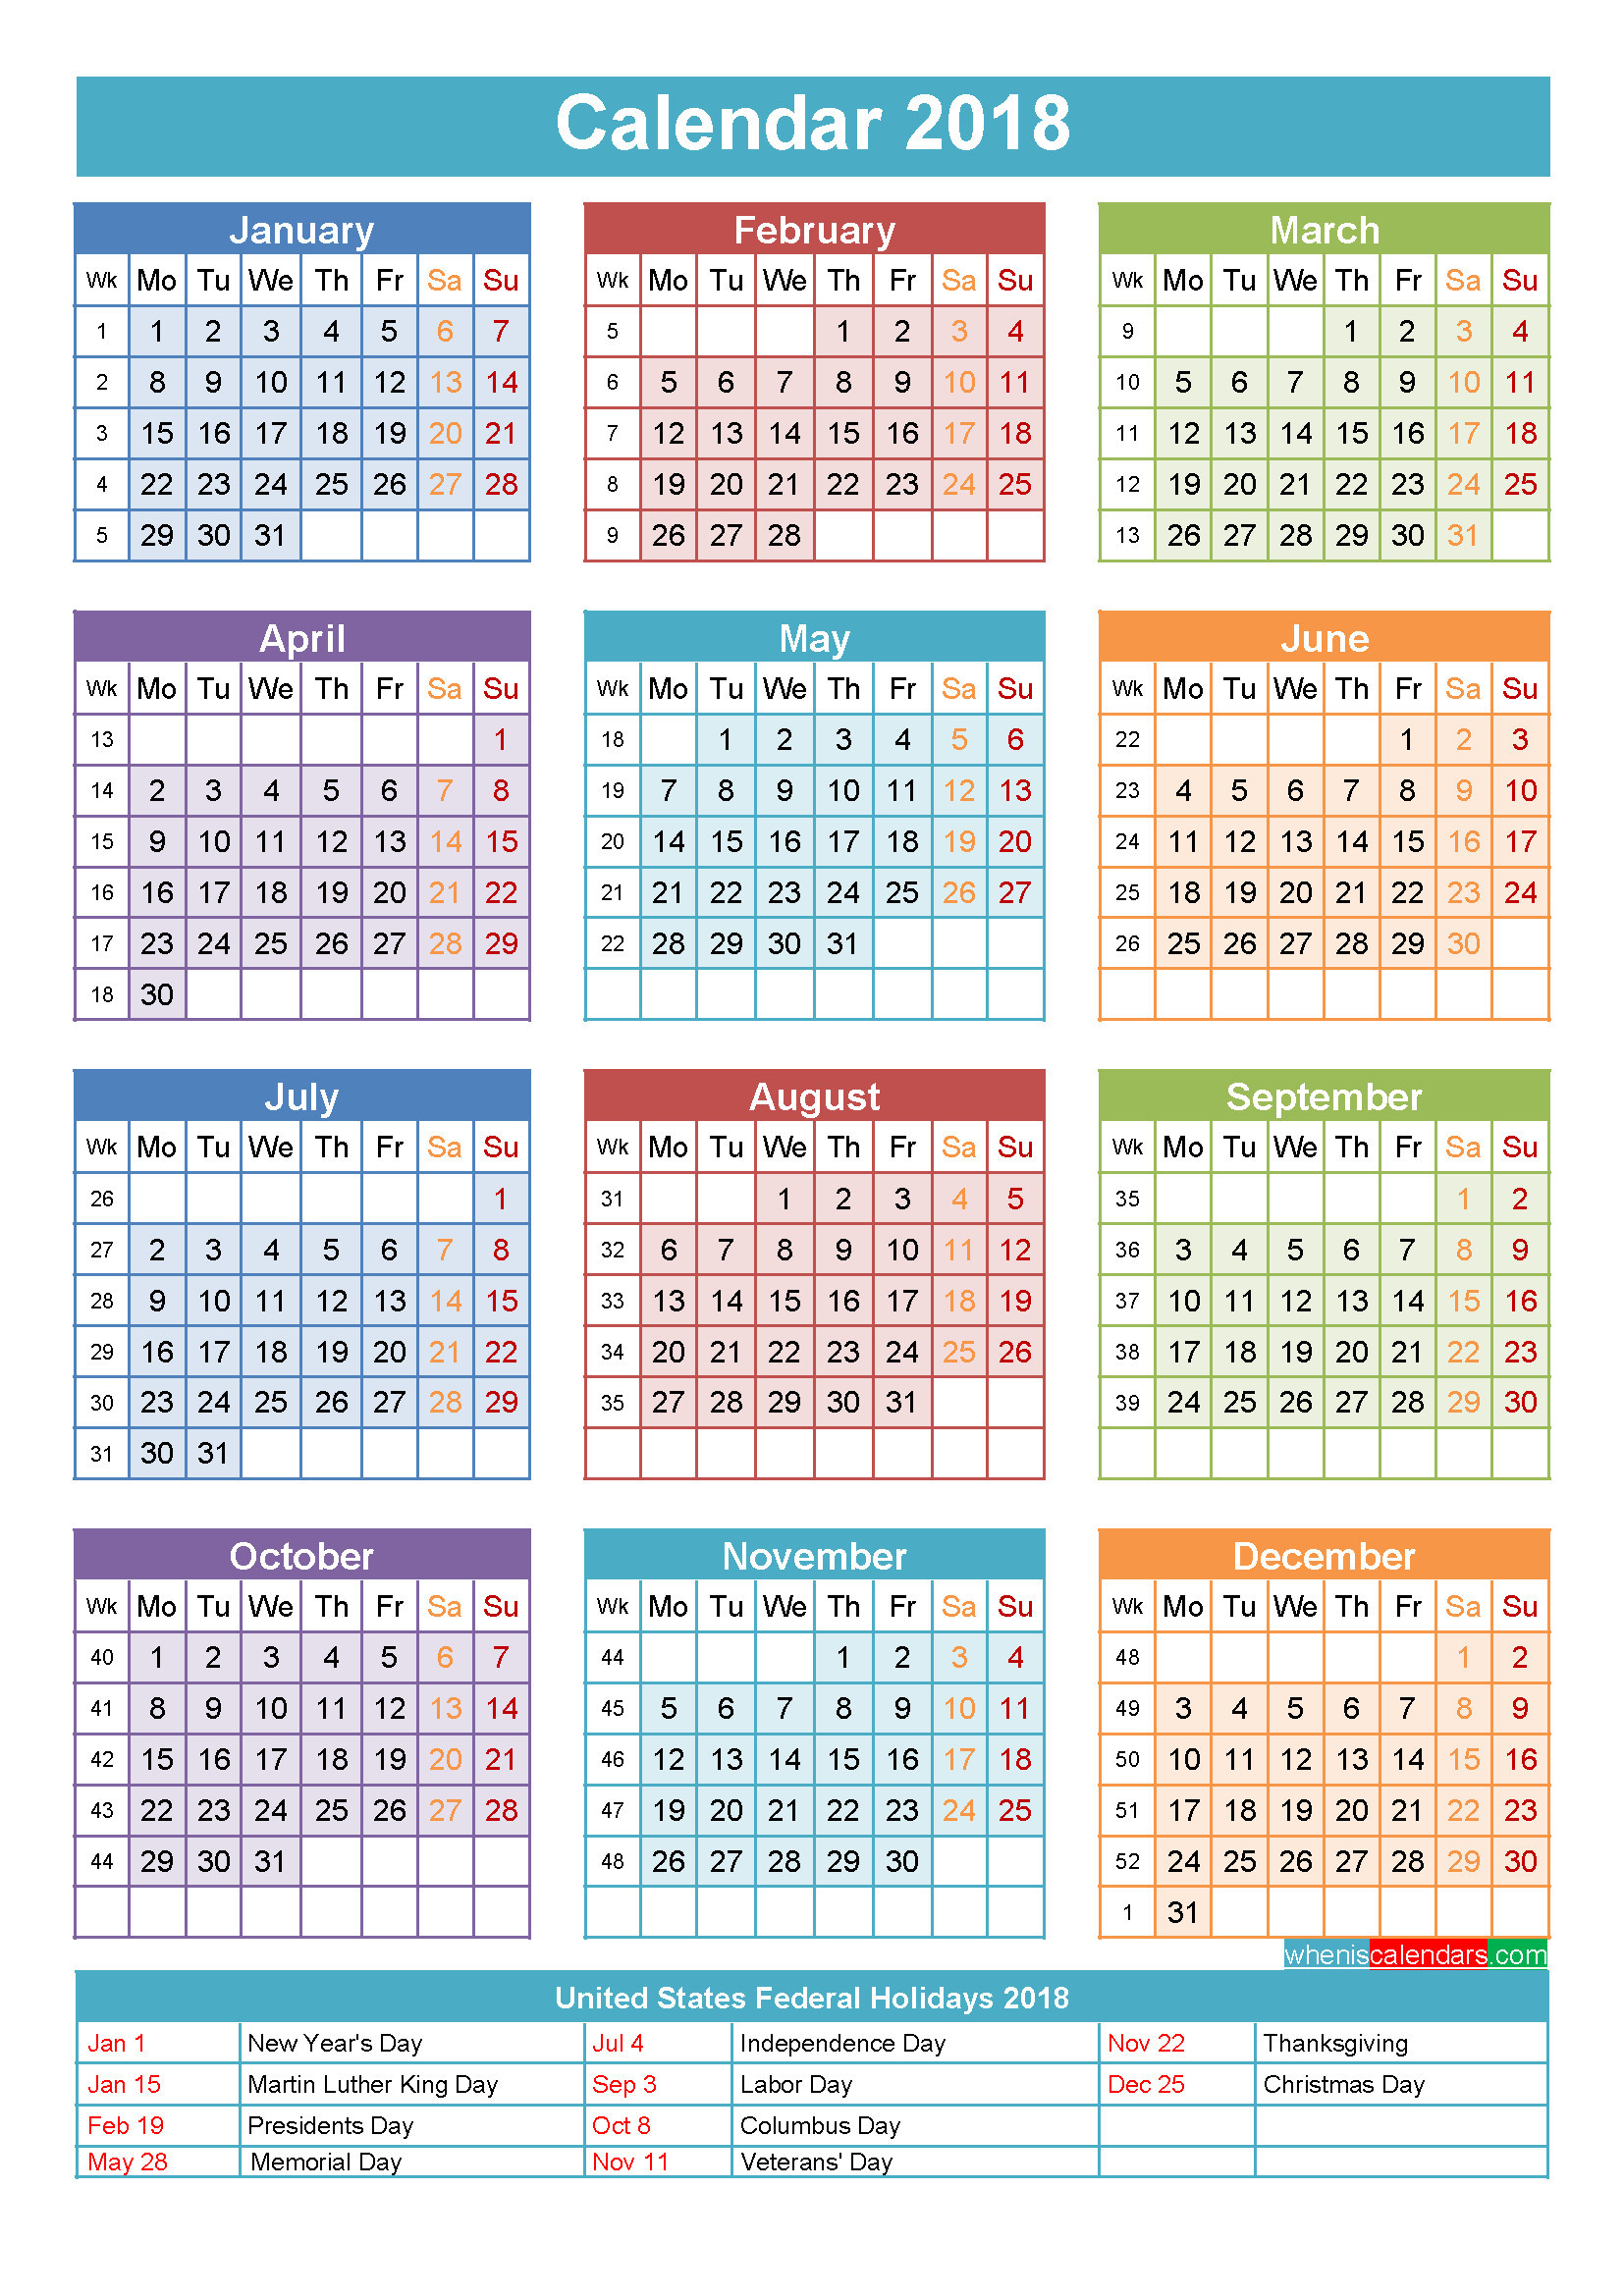 1654x2339 Wallpaper Calendars for 2018 61 images 